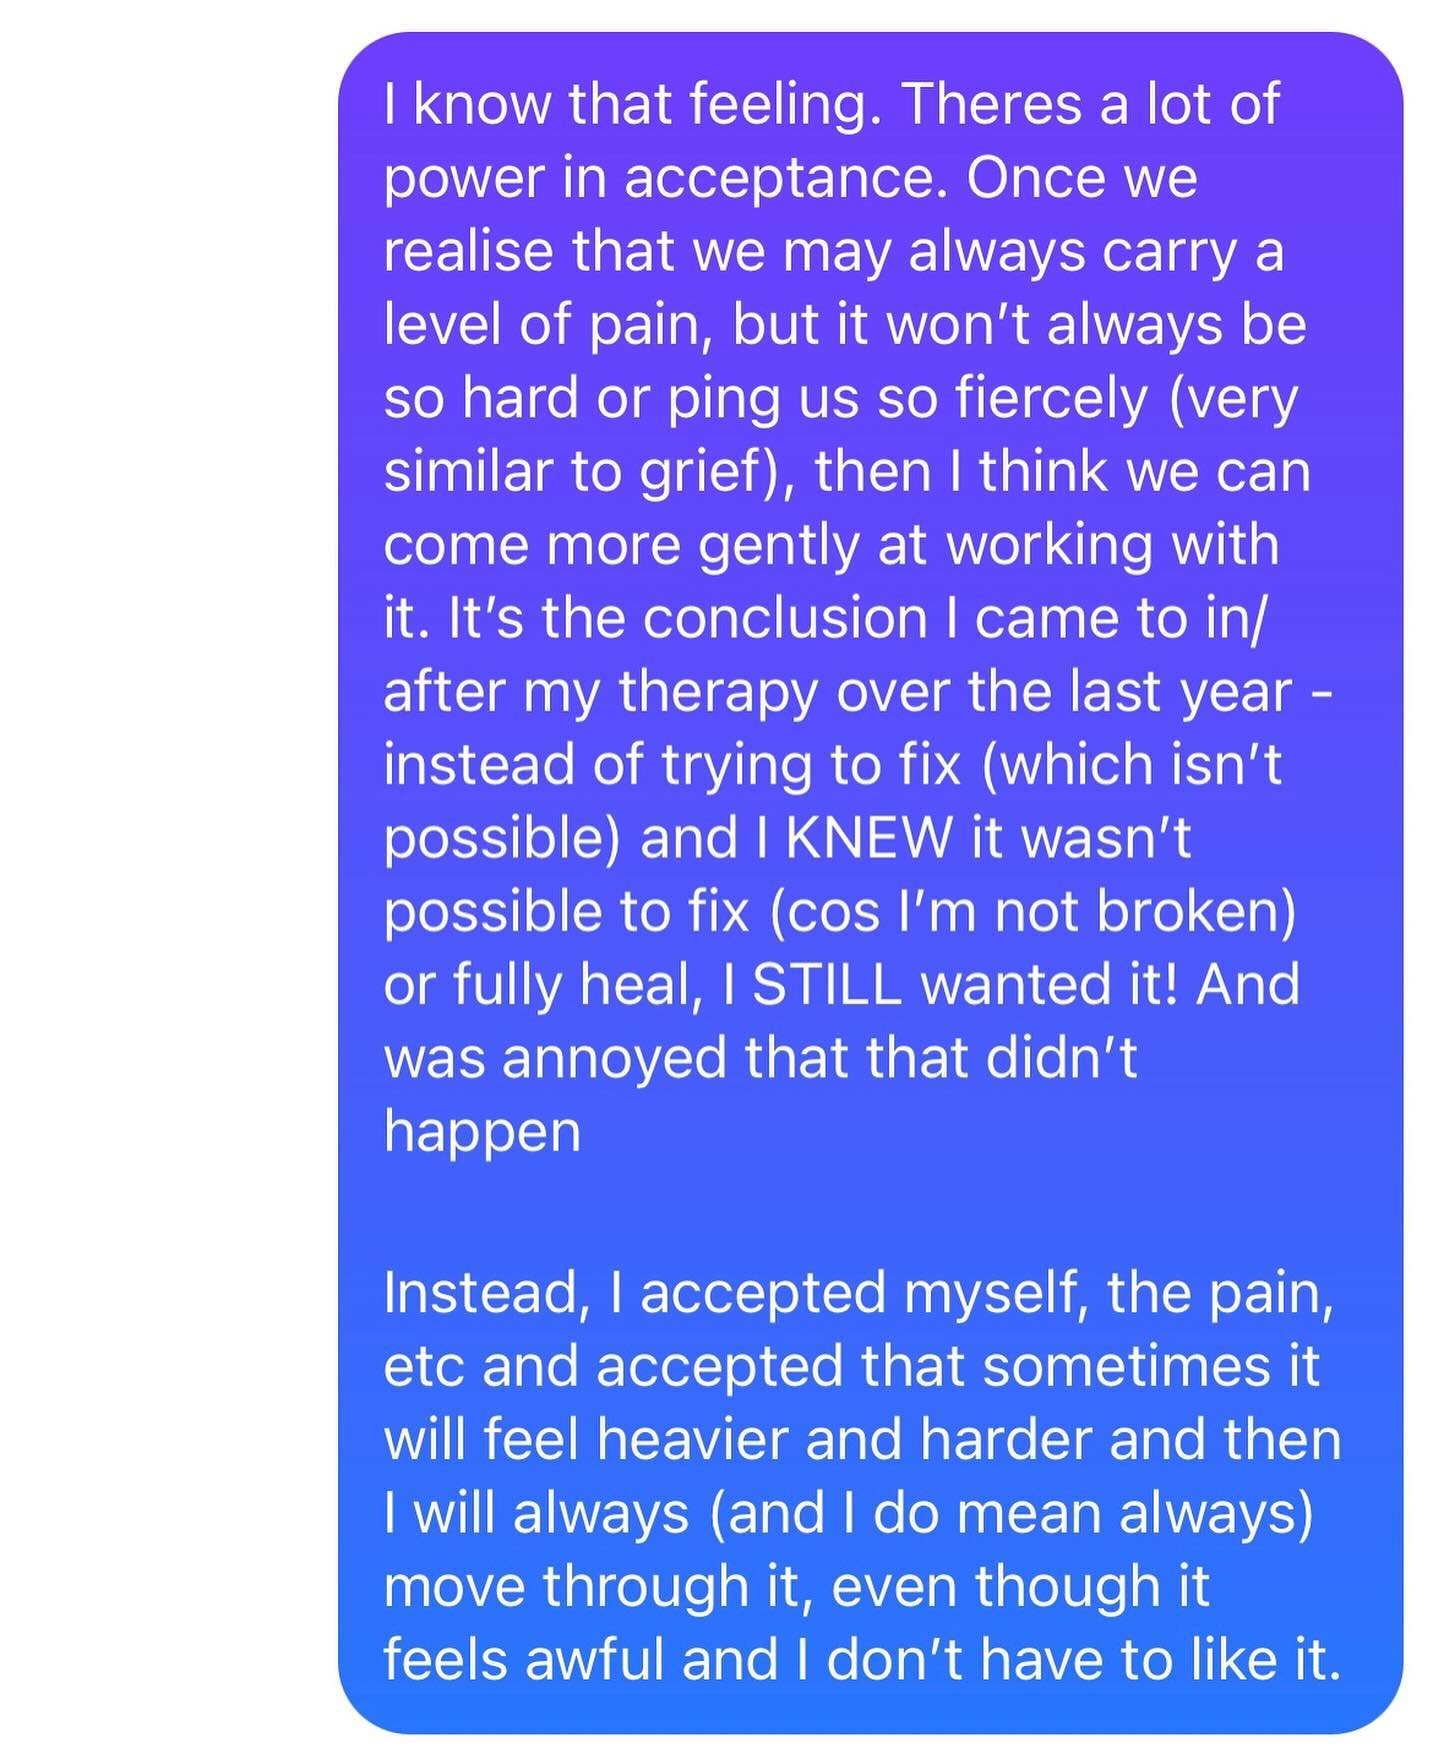 Being a human is painful. I have this perverse benefit of having been through so much awful pain in my life that I can write this ⬆️ (in a text in reply to my friend) and feel that it is true. 

So much of what we&rsquo;re sold is really ill-disguise